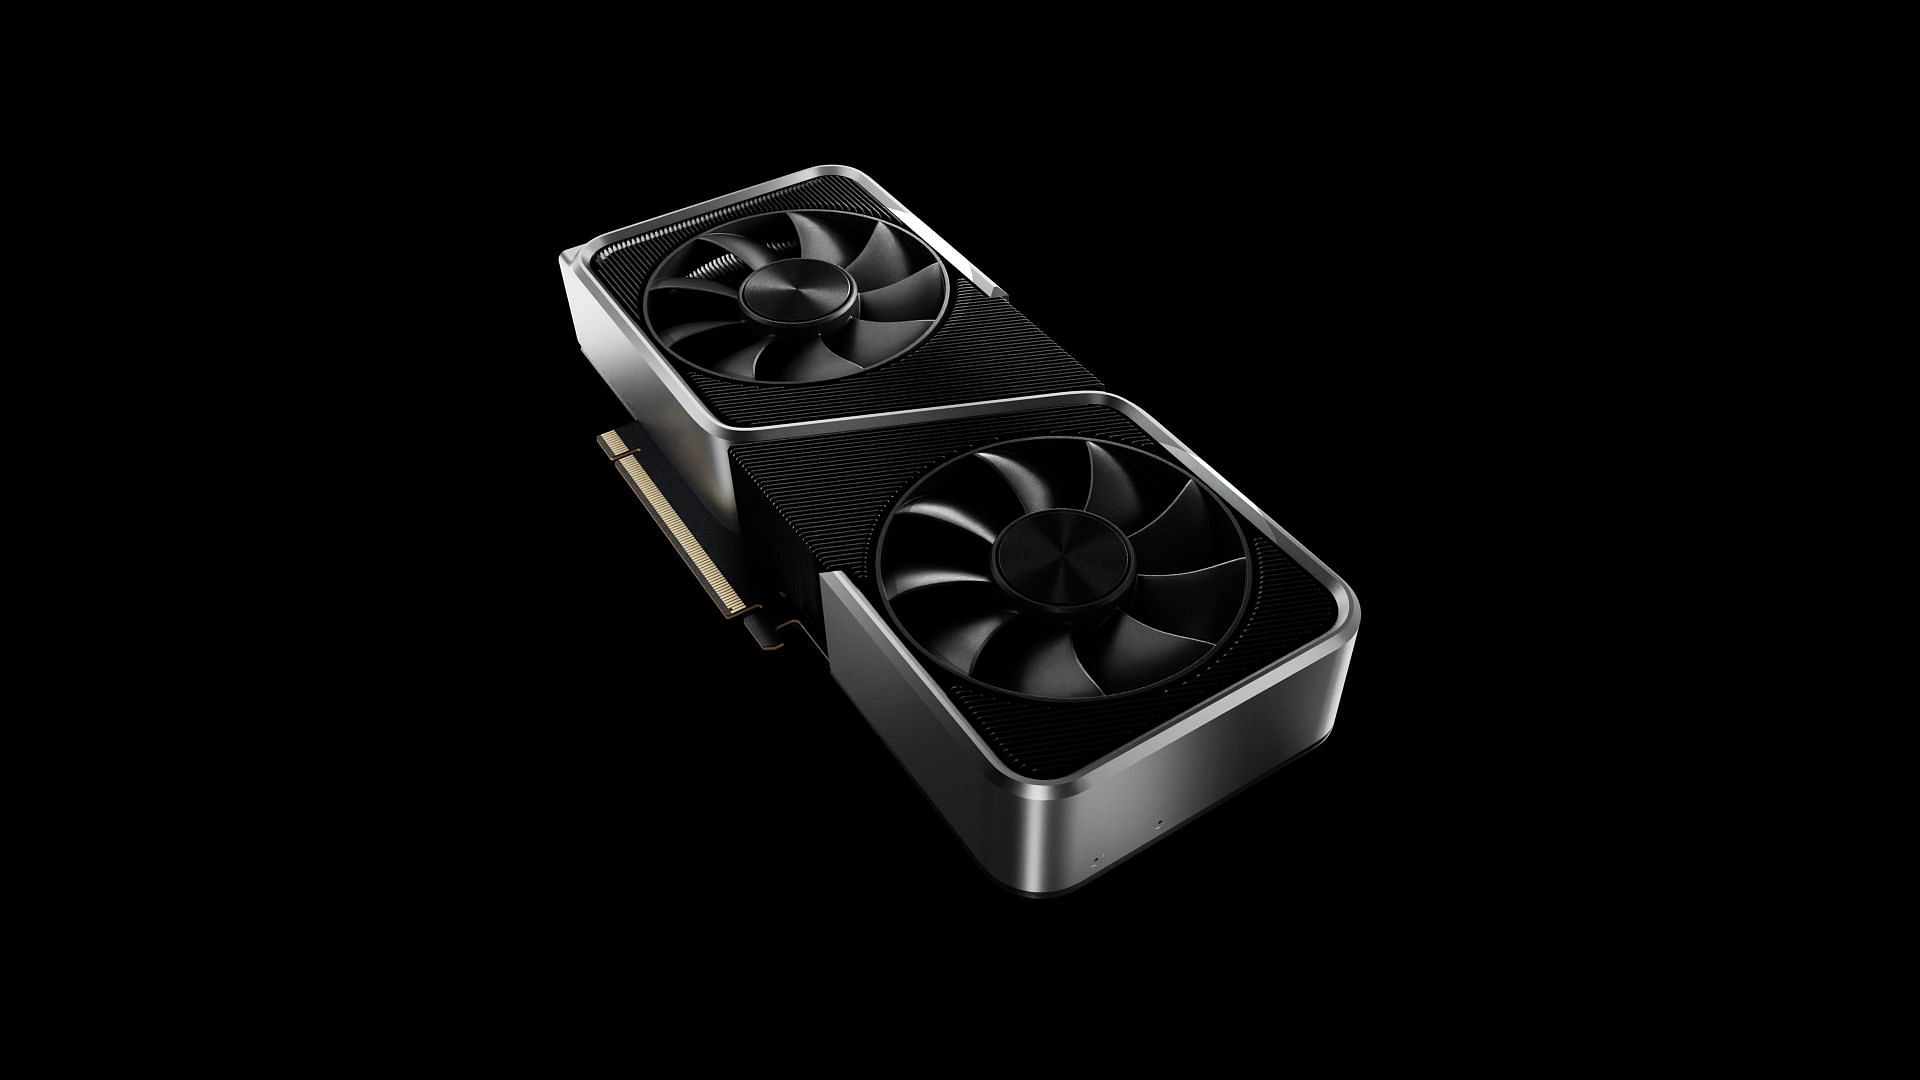 The RTX 3060 Founders